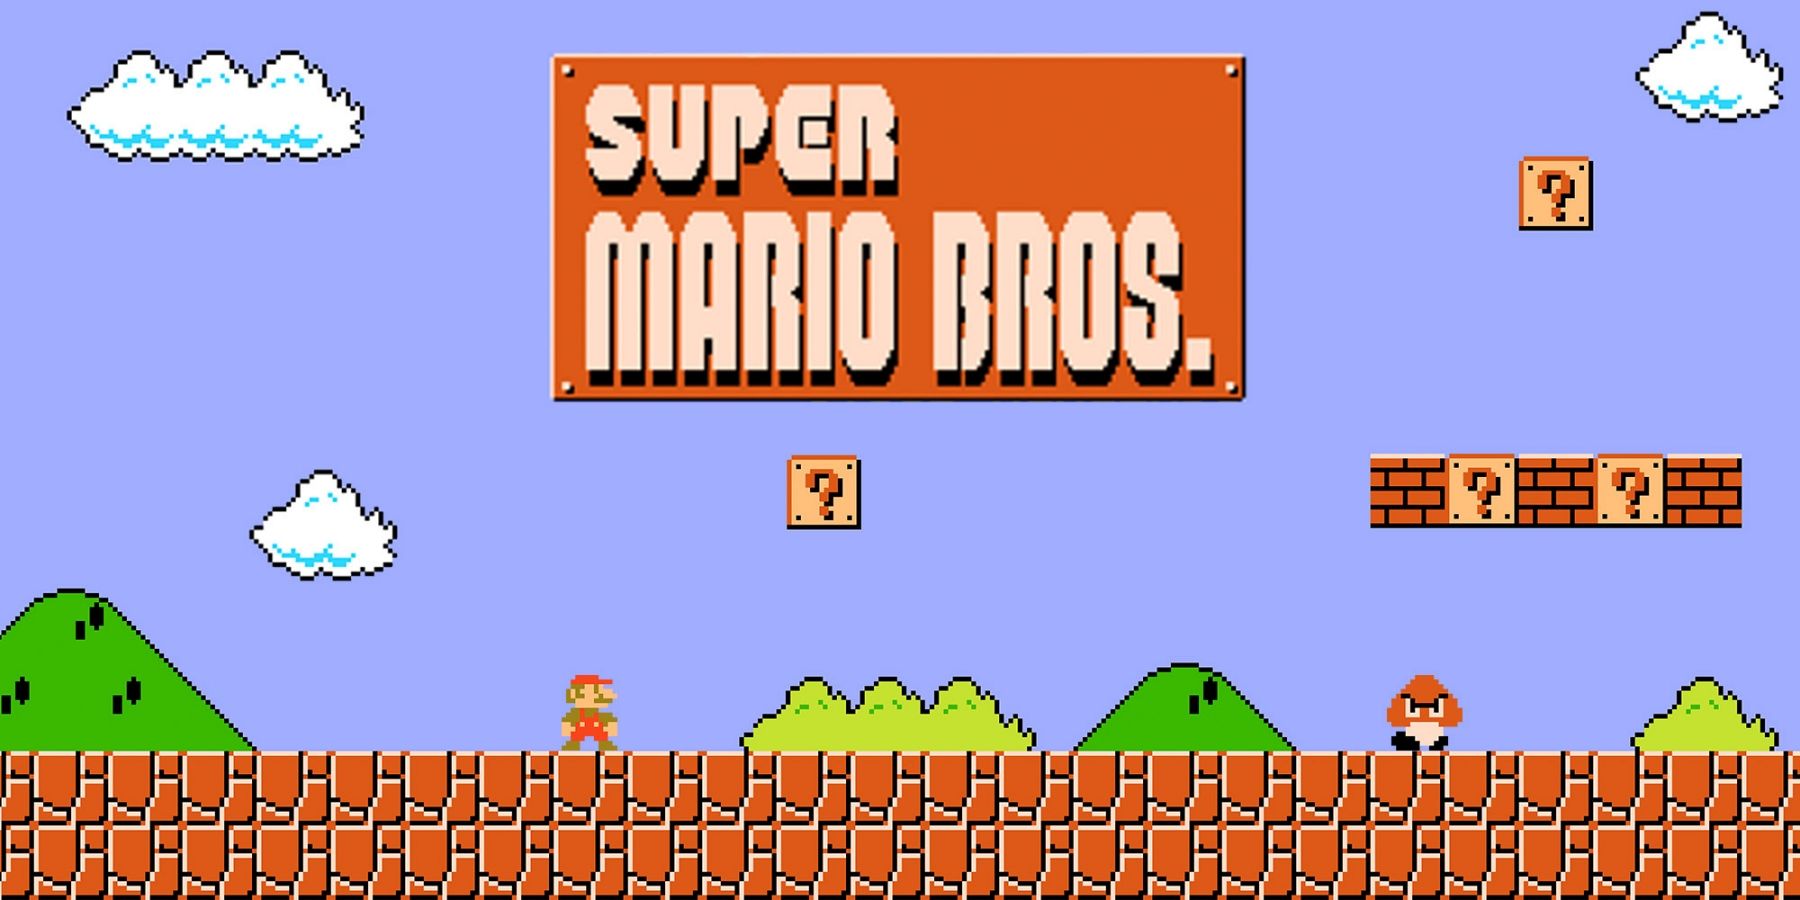 Playable Super Mario Bros. Made in Minecraft Without Using Mods